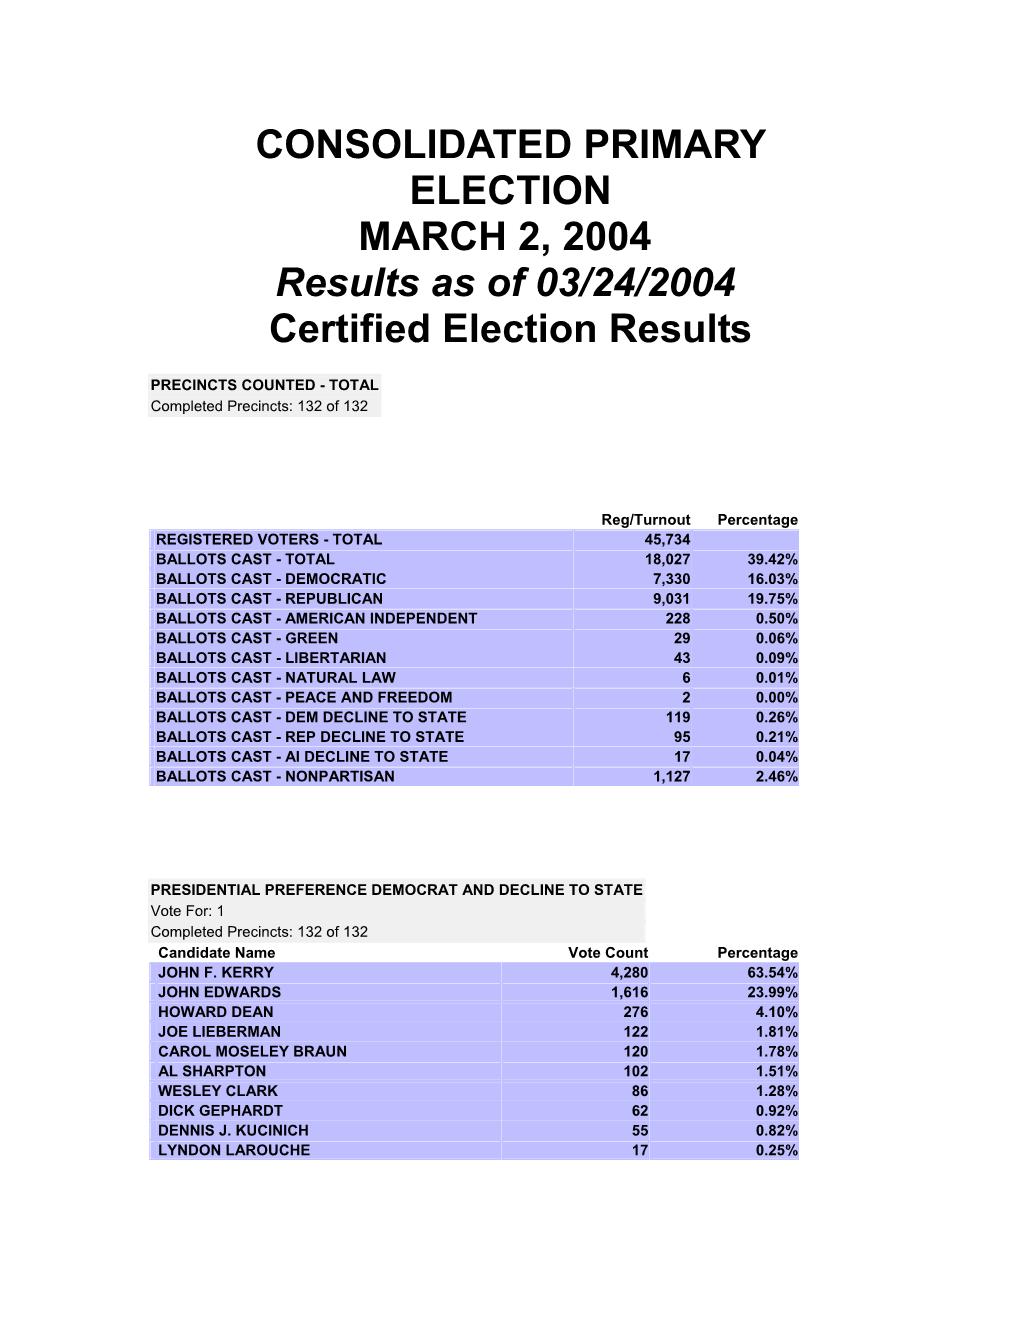 CONSOLIDATED PRIMARY ELECTION MARCH 2, 2004 Results As of 03/24/2004 Certified Election Results